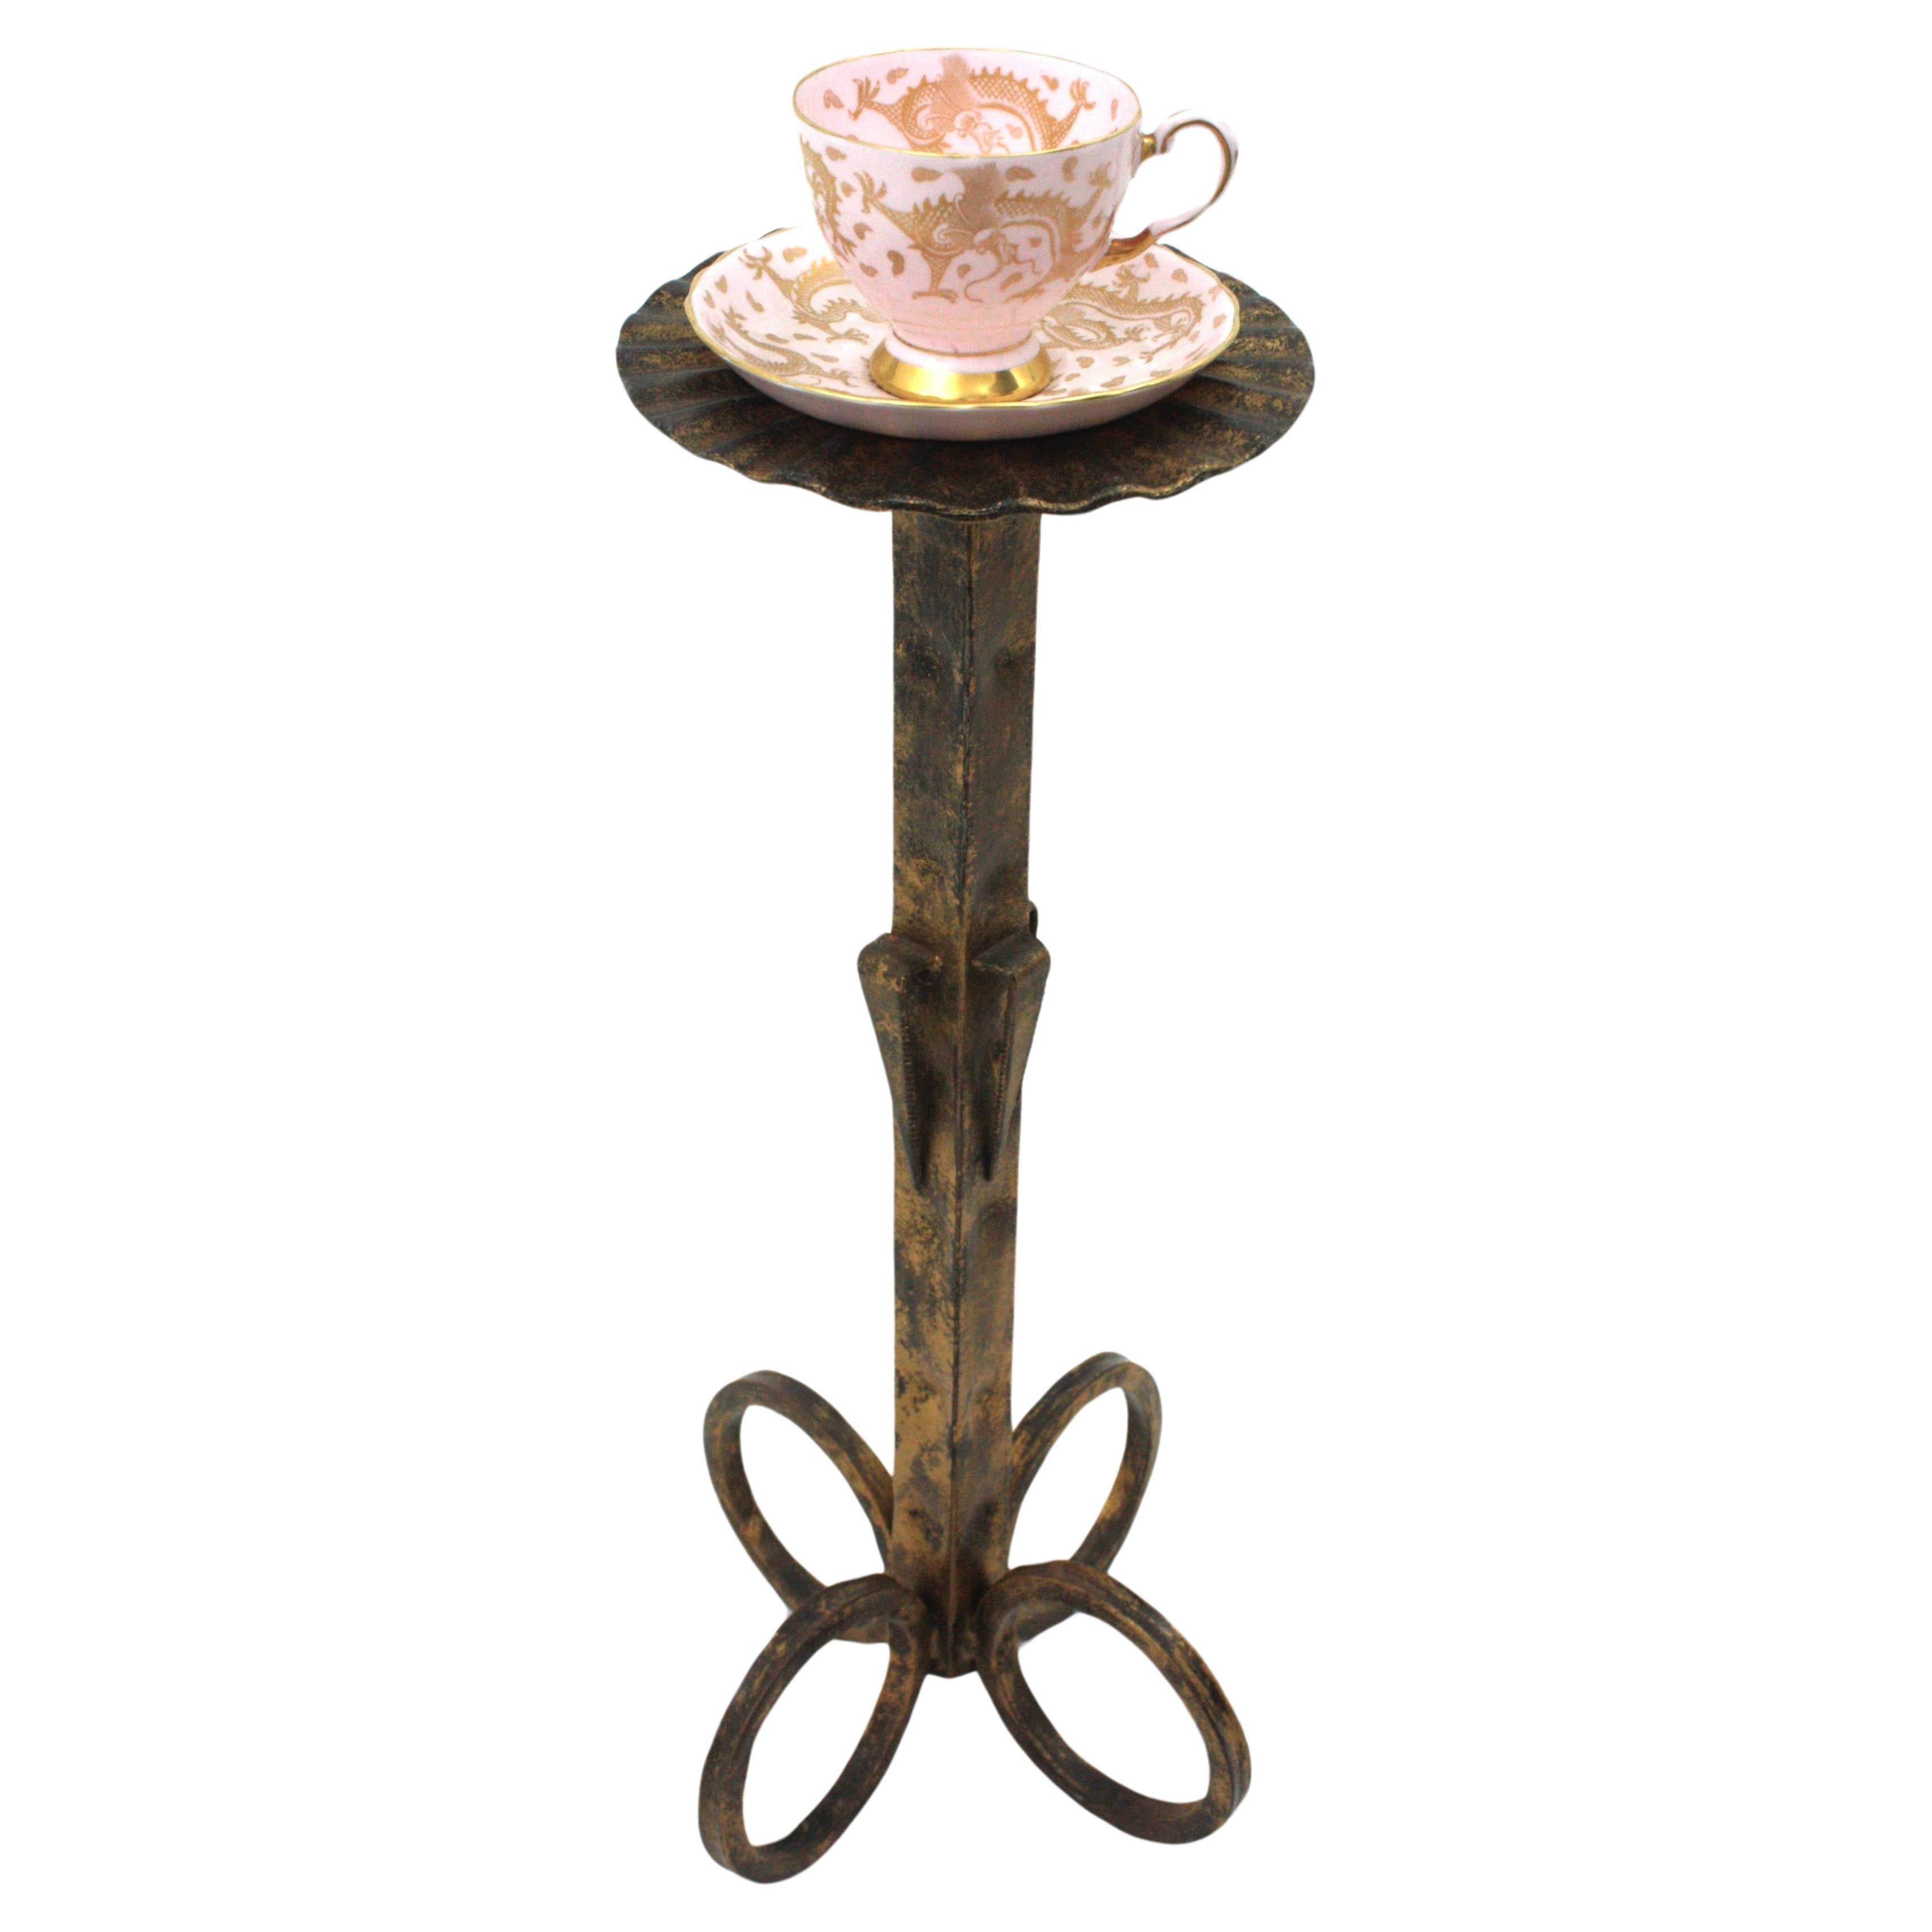 Spanish wrought iron floor ashtray or drinks / cocktails table standing on a looped base, Spain, 1950s.
Handcrafted in wrought gilt iron. The scalloped top stands up on a four loop base 
Terrific parcel-gilt finish and foliage decorations on the